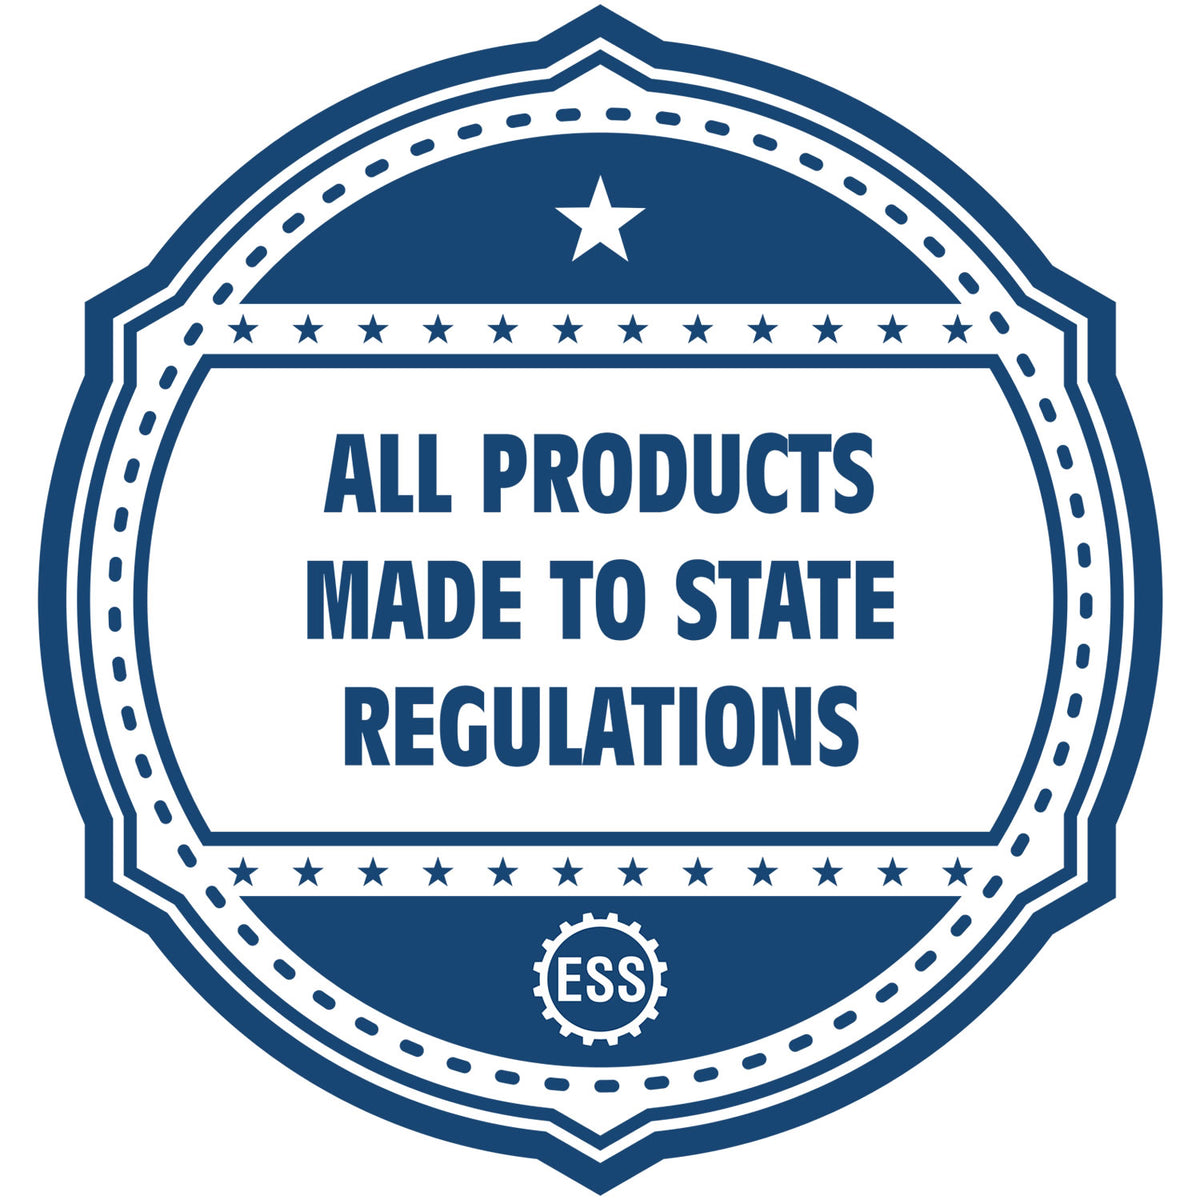 An icon or badge element for the Self-Inking Louisiana PE Stamp showing that this product is made in compliance with state regulations.